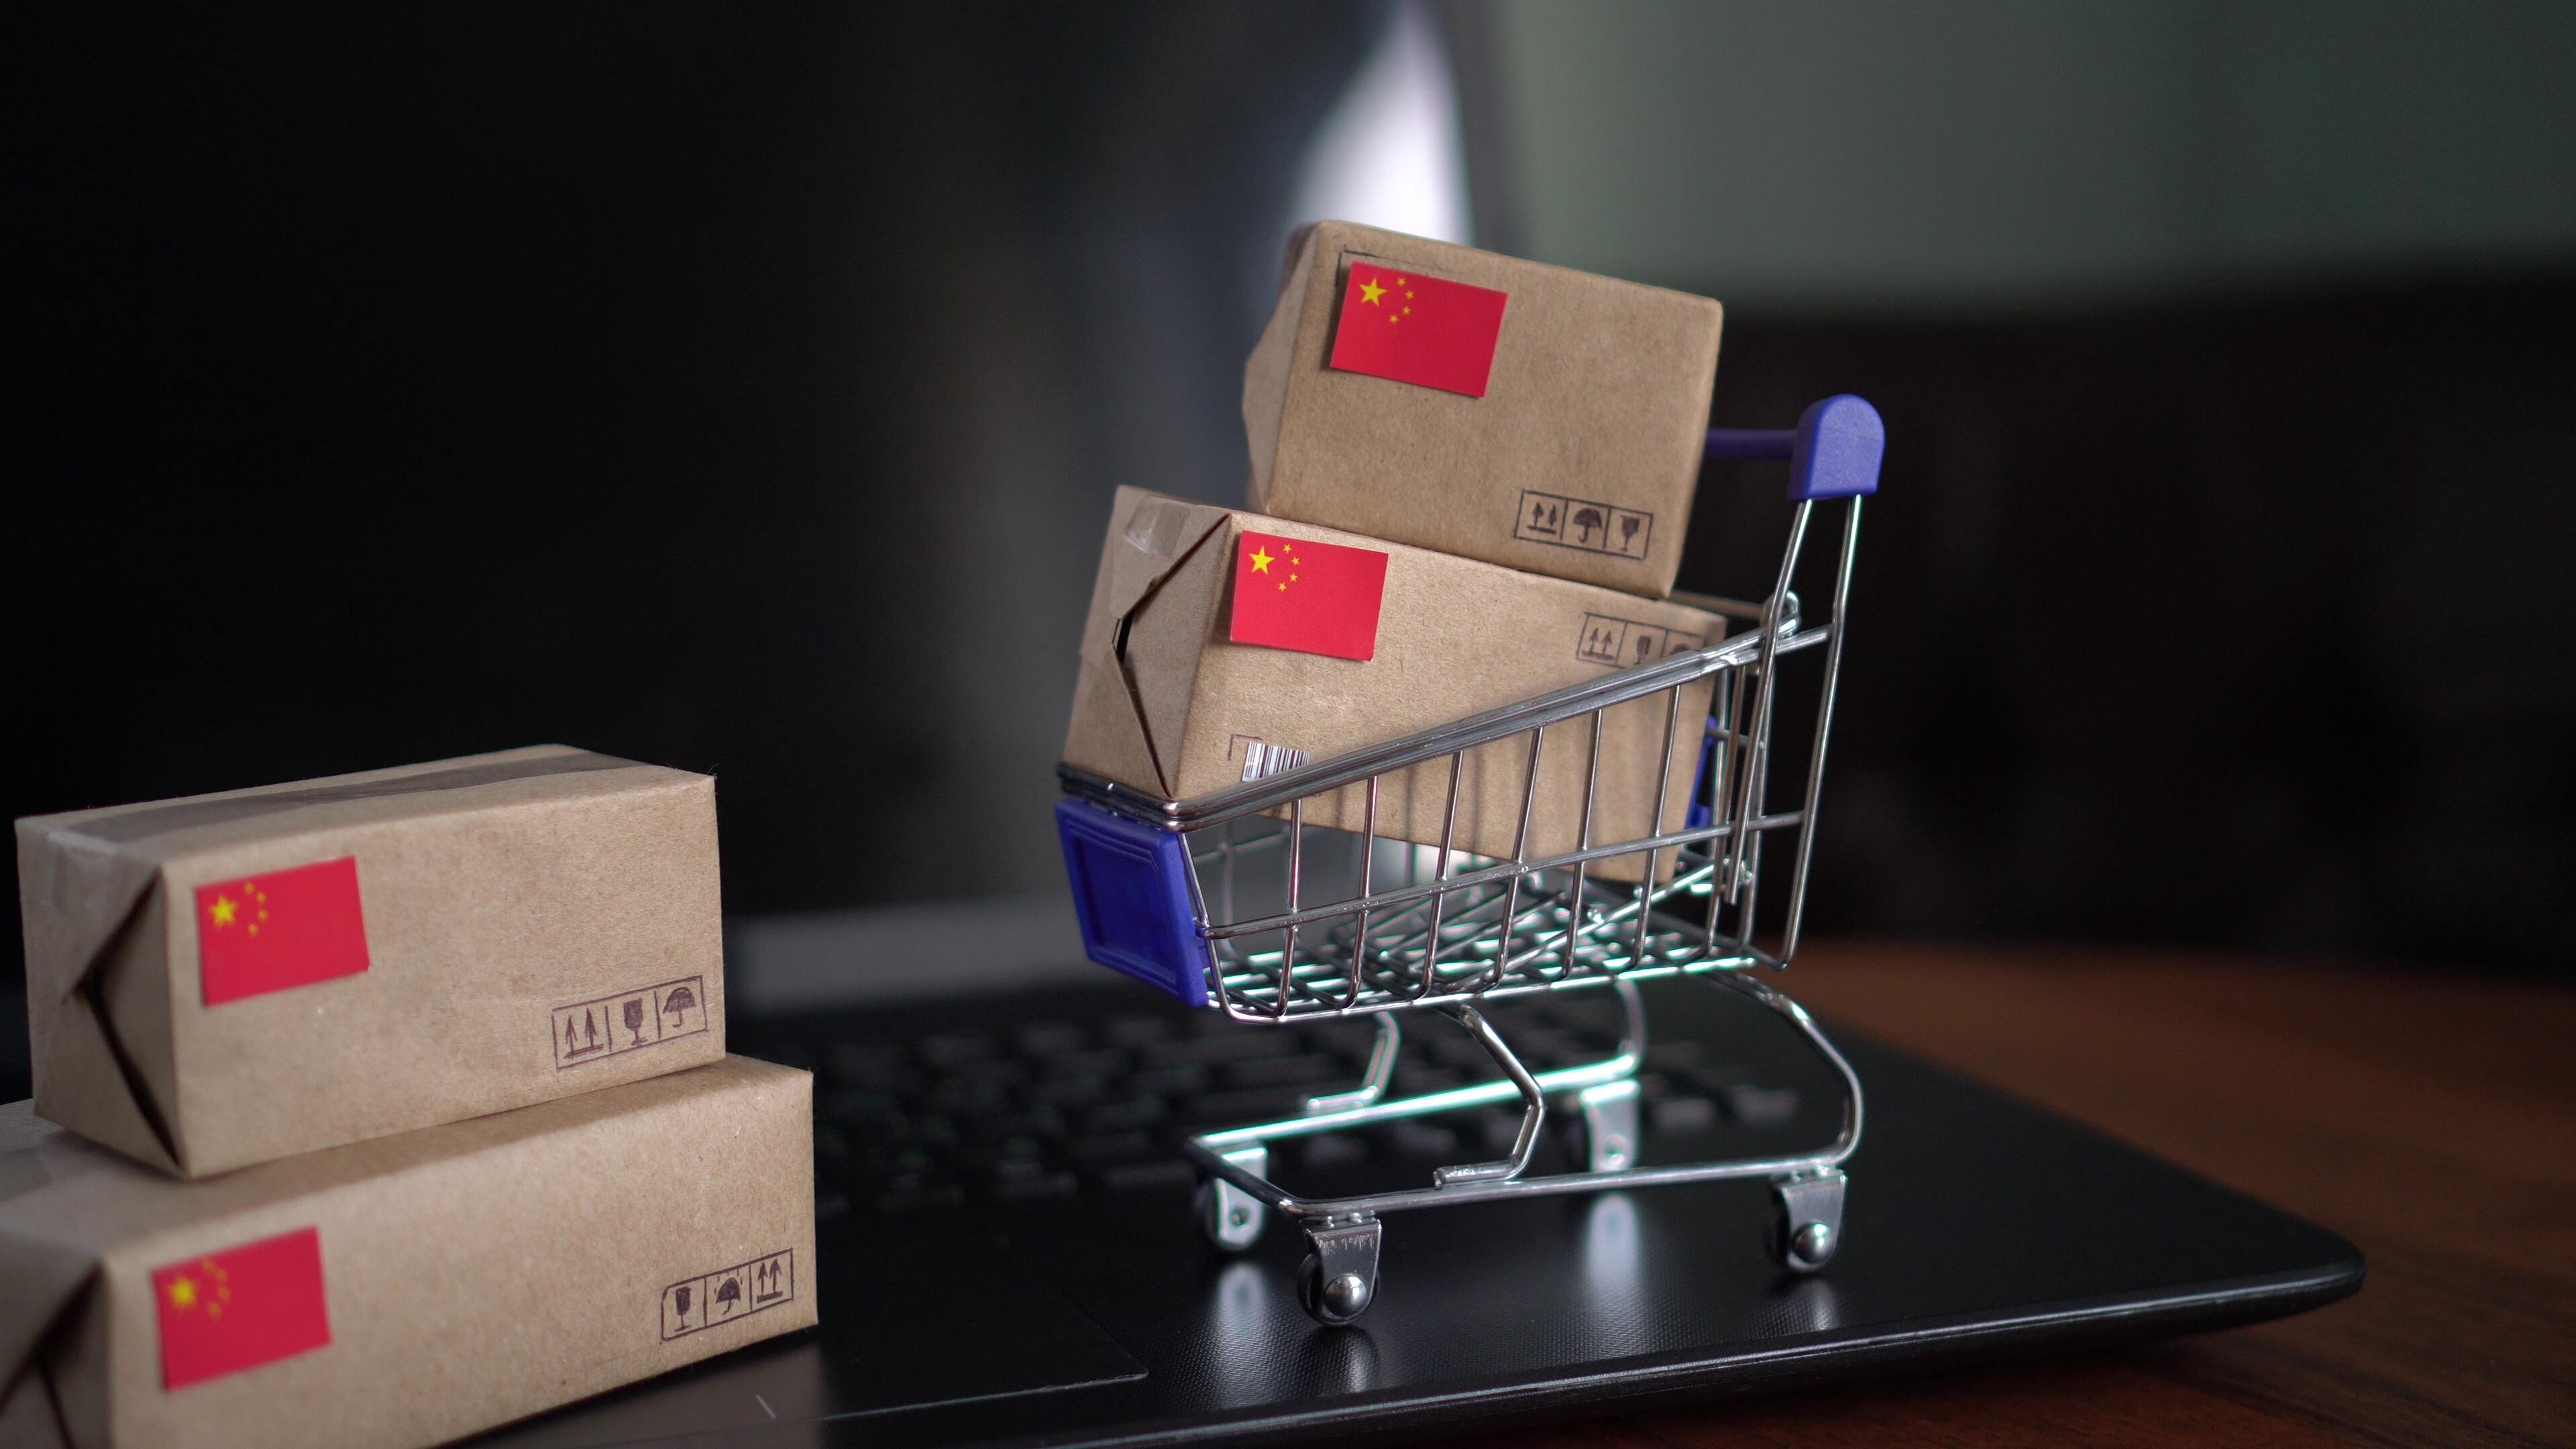 China has long been recognised as the world’s biggest e-commerce market, driven by technology giants that helped revolutionise consumer spending behaviour in the second-largest economy behind the United States. Photo: Shutterstock